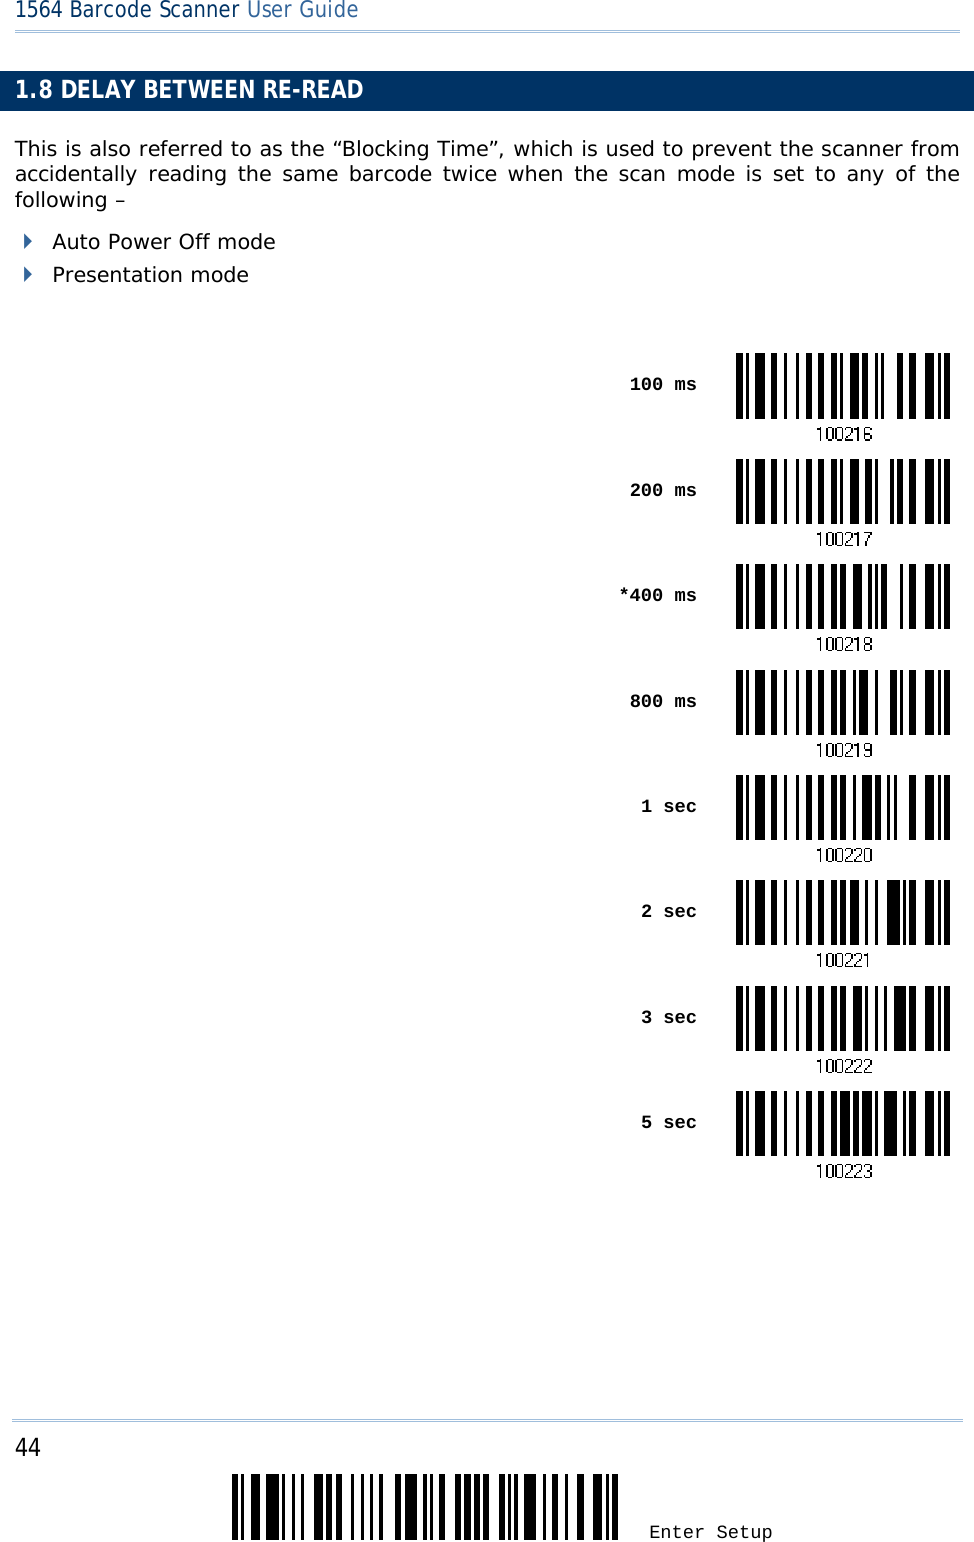 44 Enter Setup 1564 Barcode Scanner User Guide  1.8 DELAY BETWEEN RE-READ This is also referred to as the “Blocking Time”, which is used to prevent the scanner from accidentally reading the same barcode twice when the scan mode is set to any of the following –   Auto Power Off mode  Presentation mode   100 ms 200 ms *400 ms 800 ms 1 sec 2 sec 3 sec 5 sec  